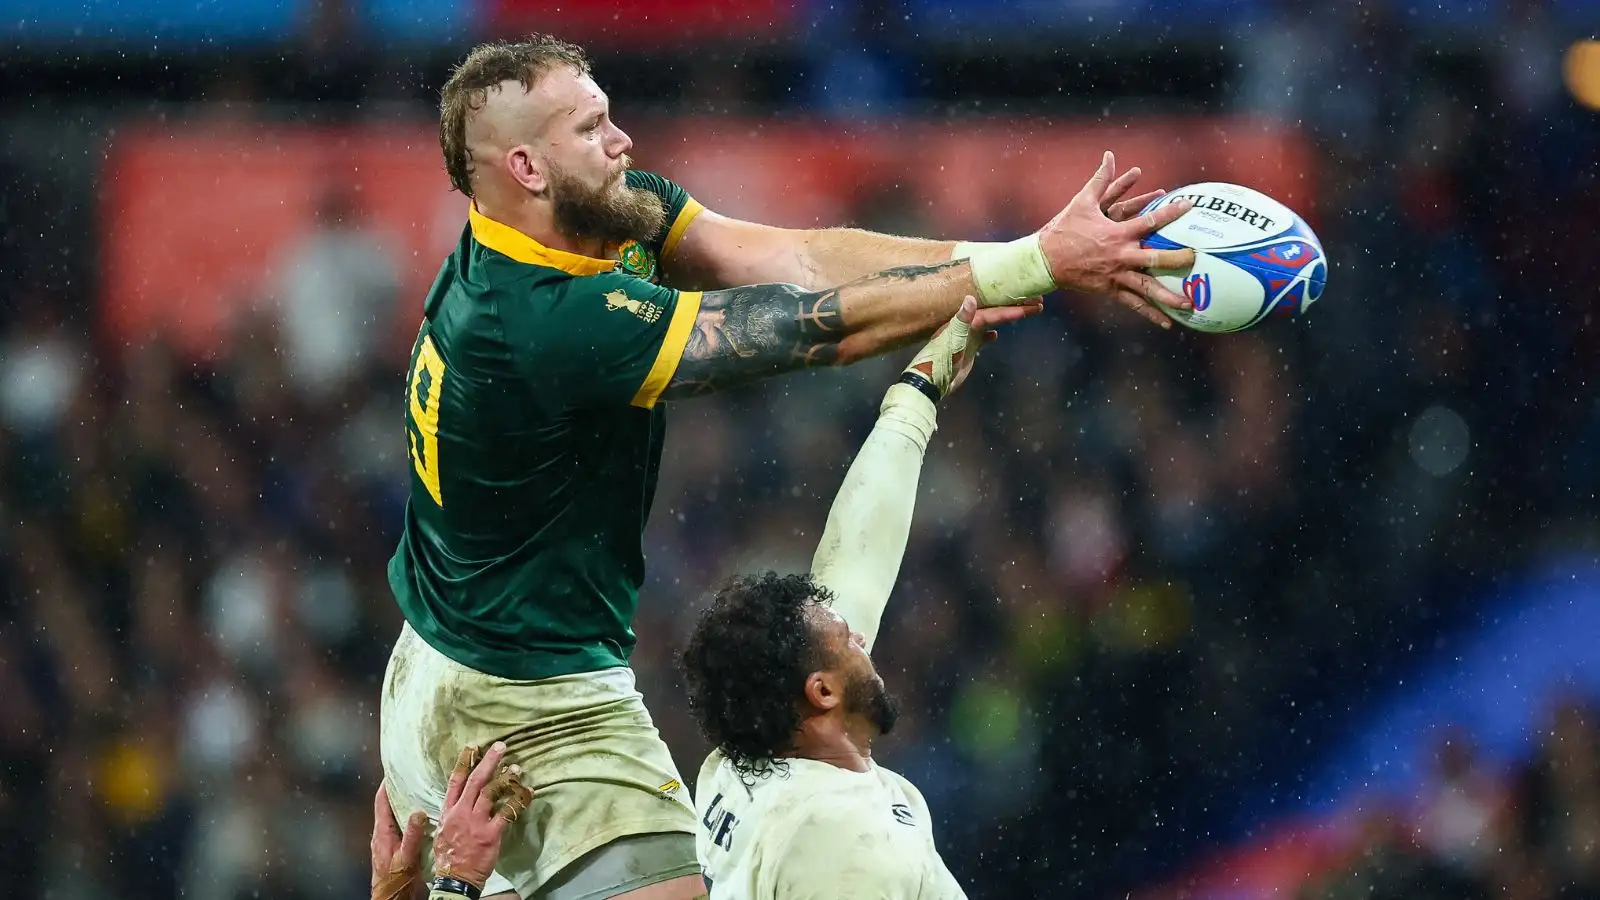 RG Snyman of South Africa during the Rugby World Cup Semi-final 2 match between England and South Africa at Stade de France.